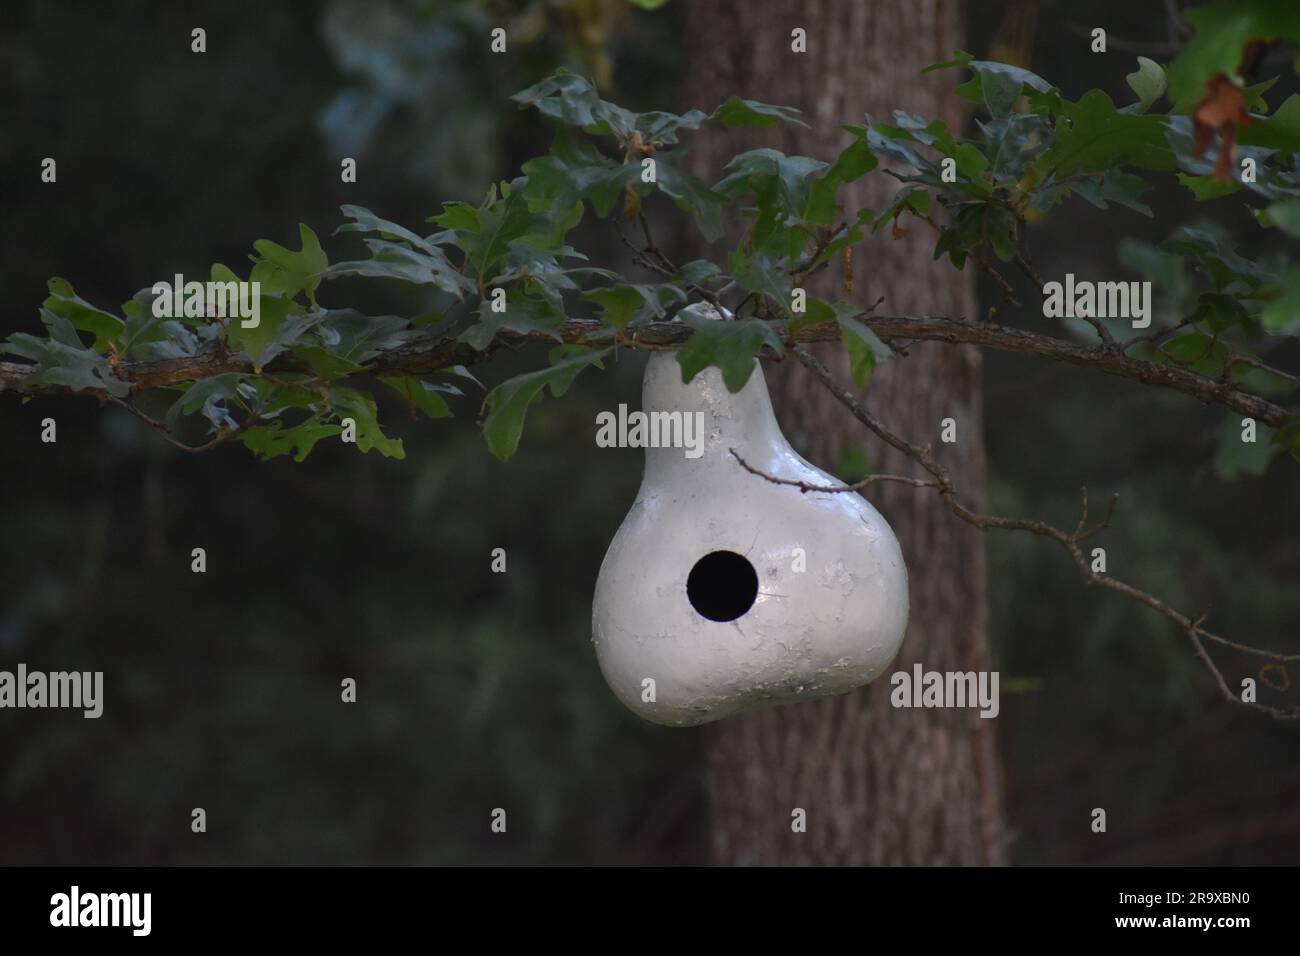 A gourd that has been hollowed out, painted white, and hung up in an oak tree for use as a bird house. Bright white against a dark background. Stock Photo